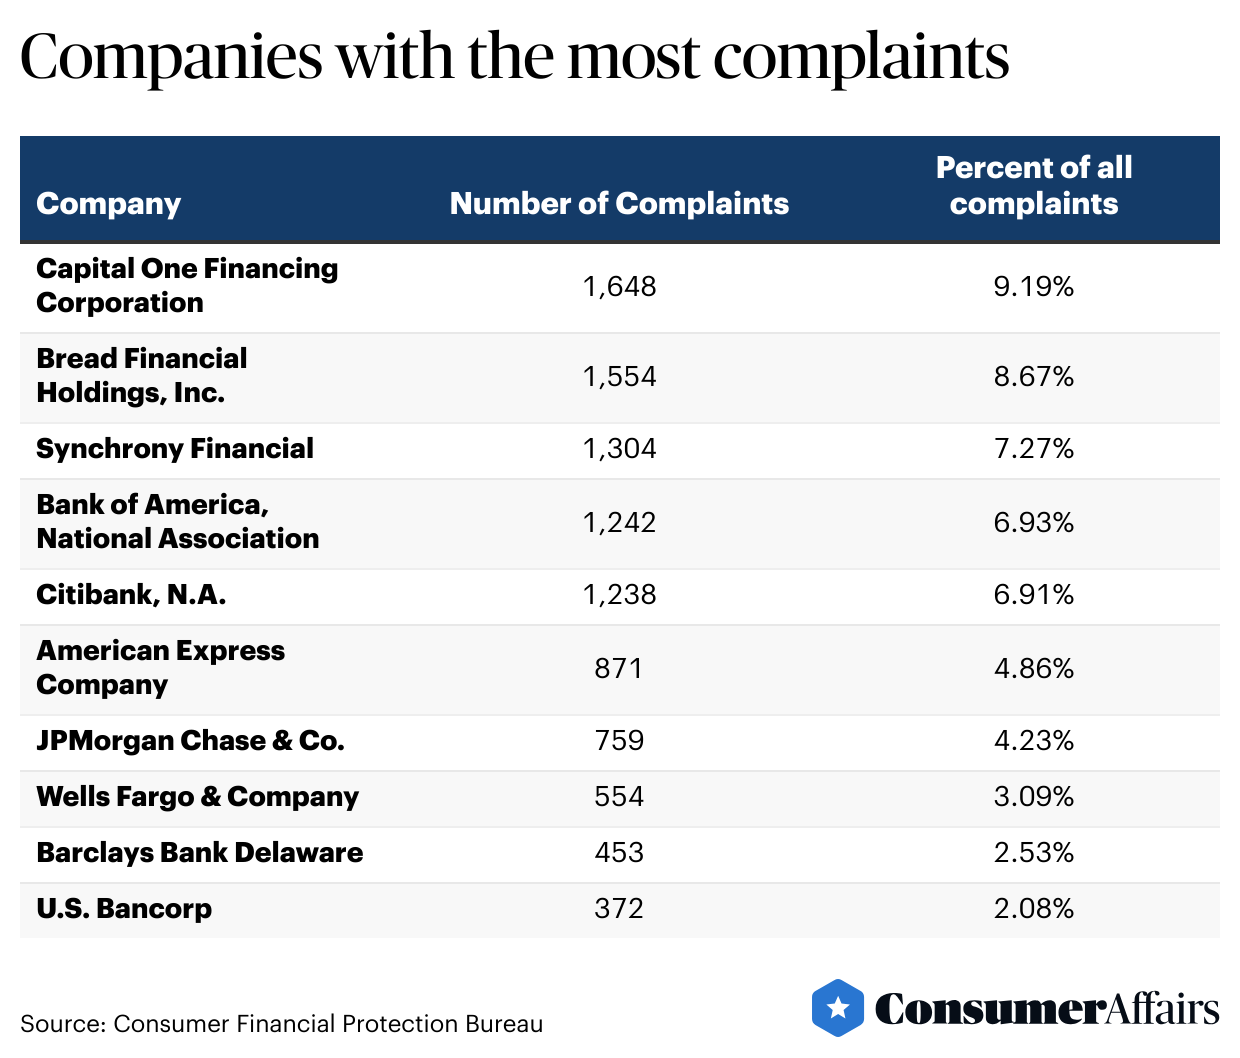 table showing companies with the most complaints